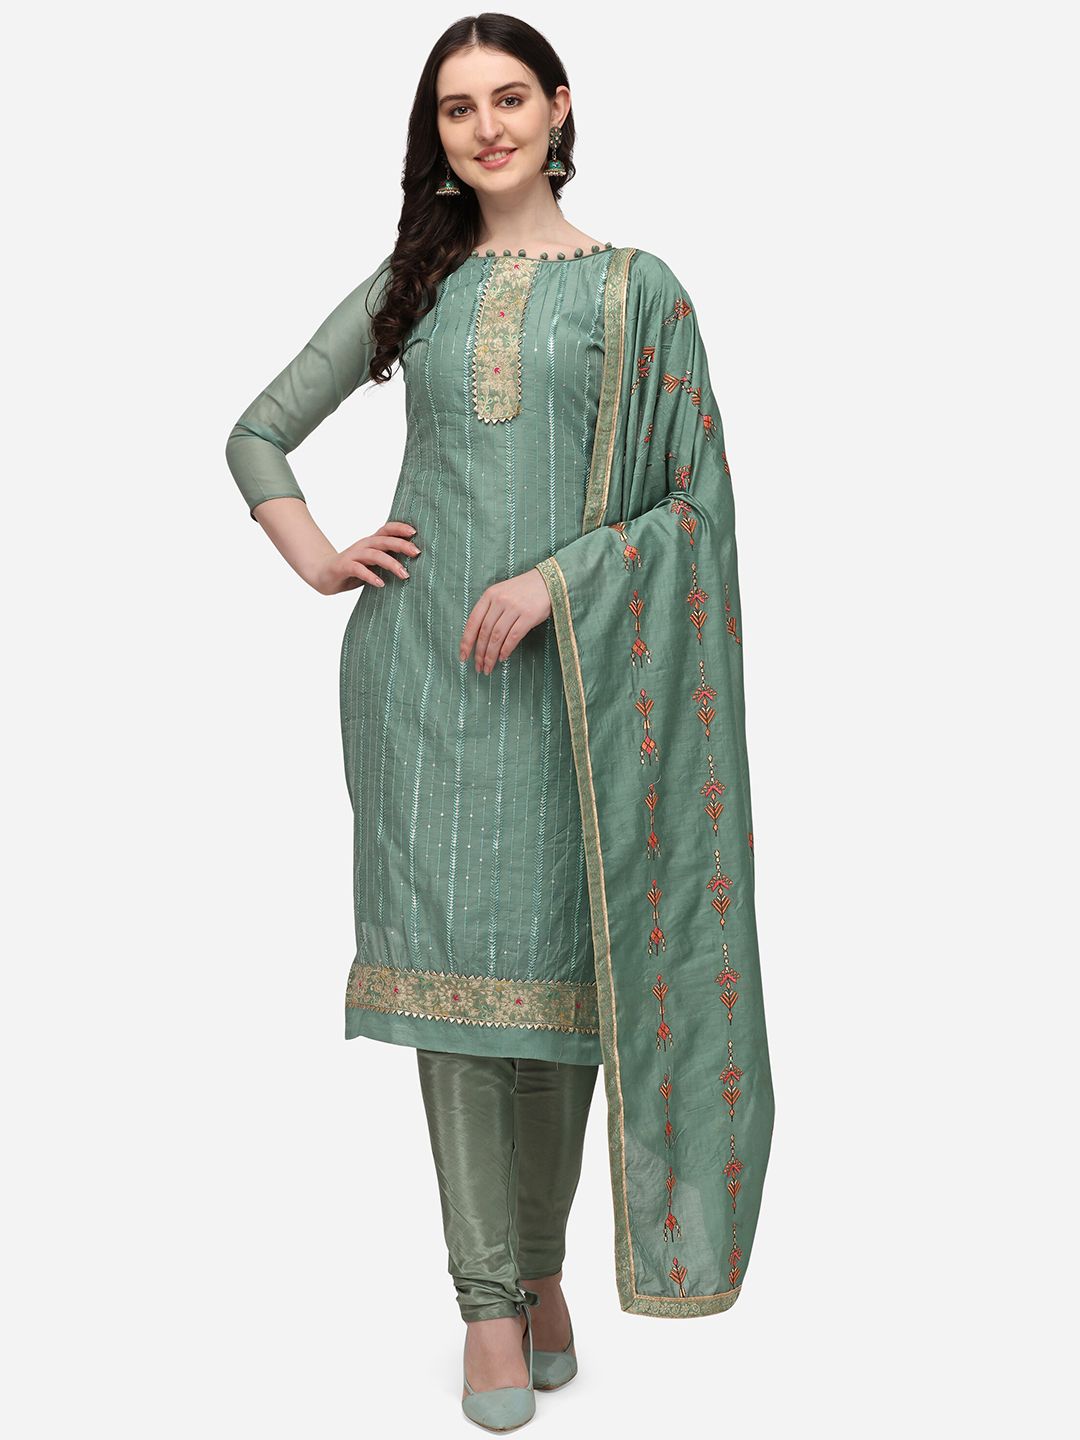 RAJGRANTH Turquoise Blue & Gold-Toned Chanderi Embroidered Unstitched Dress Material Price in India